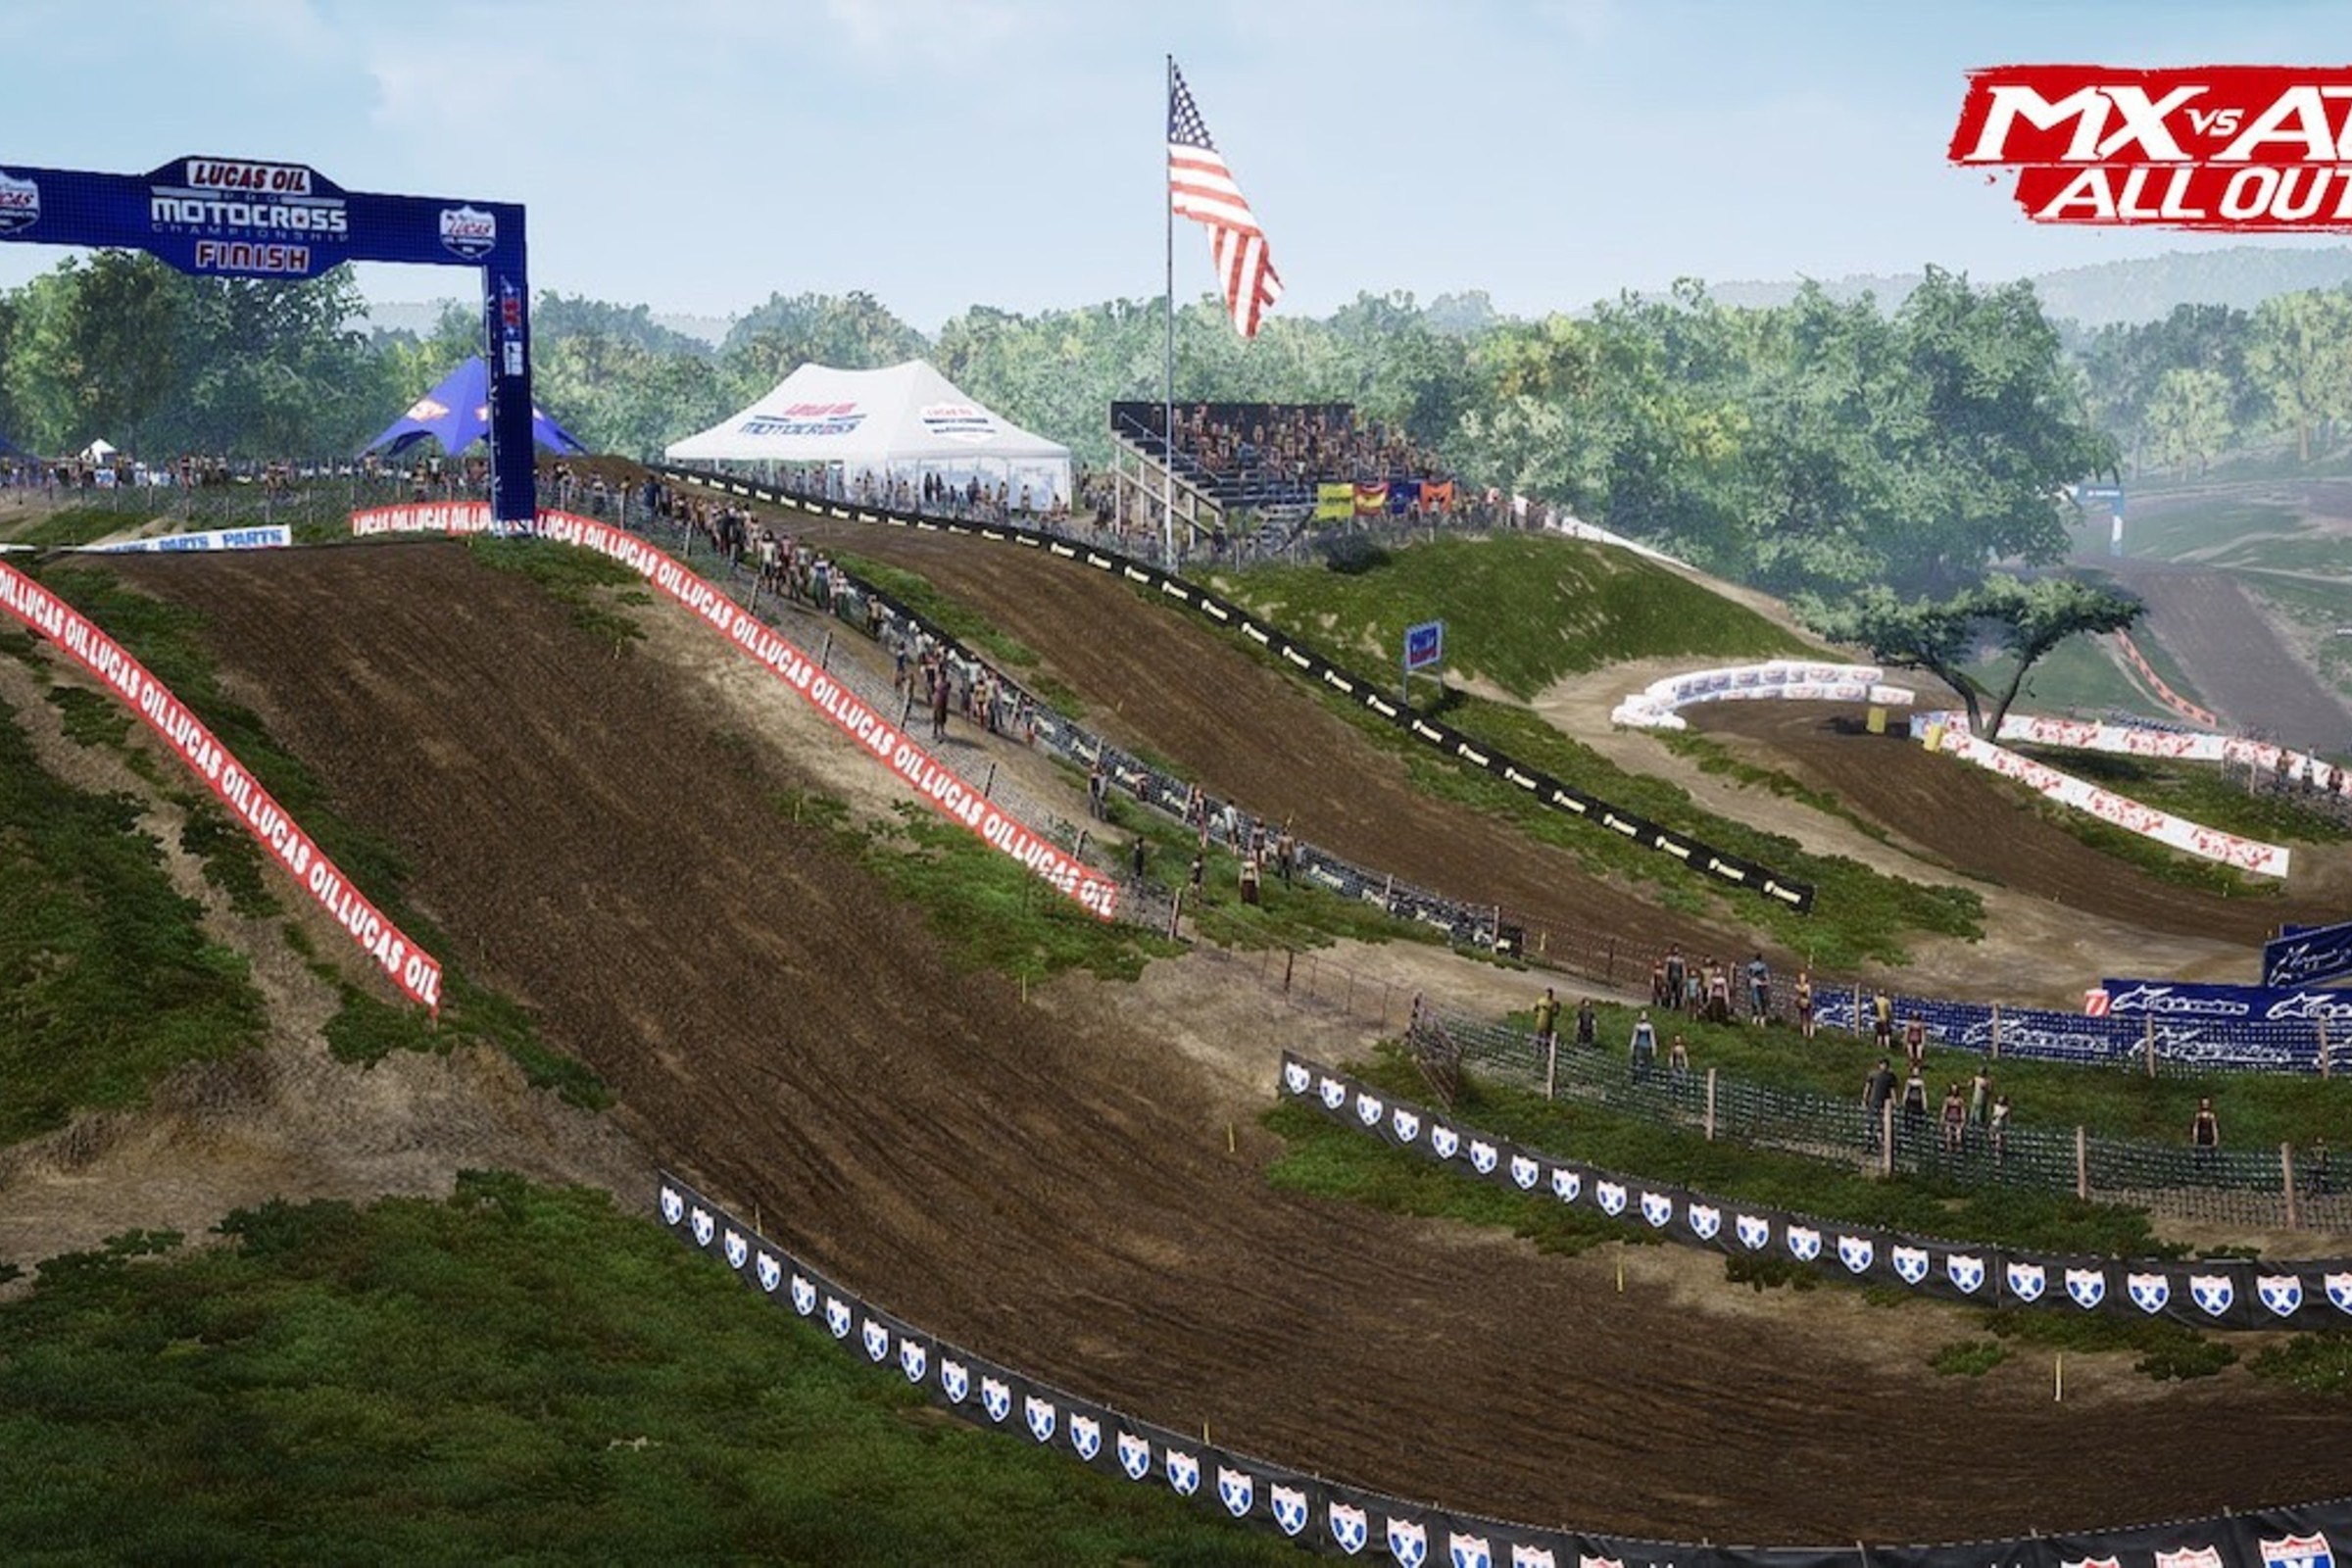 MX VS ATV ALL OUT Returns as “Official Video Game” of 2021 Lucas Oil Pro Motocross Championship